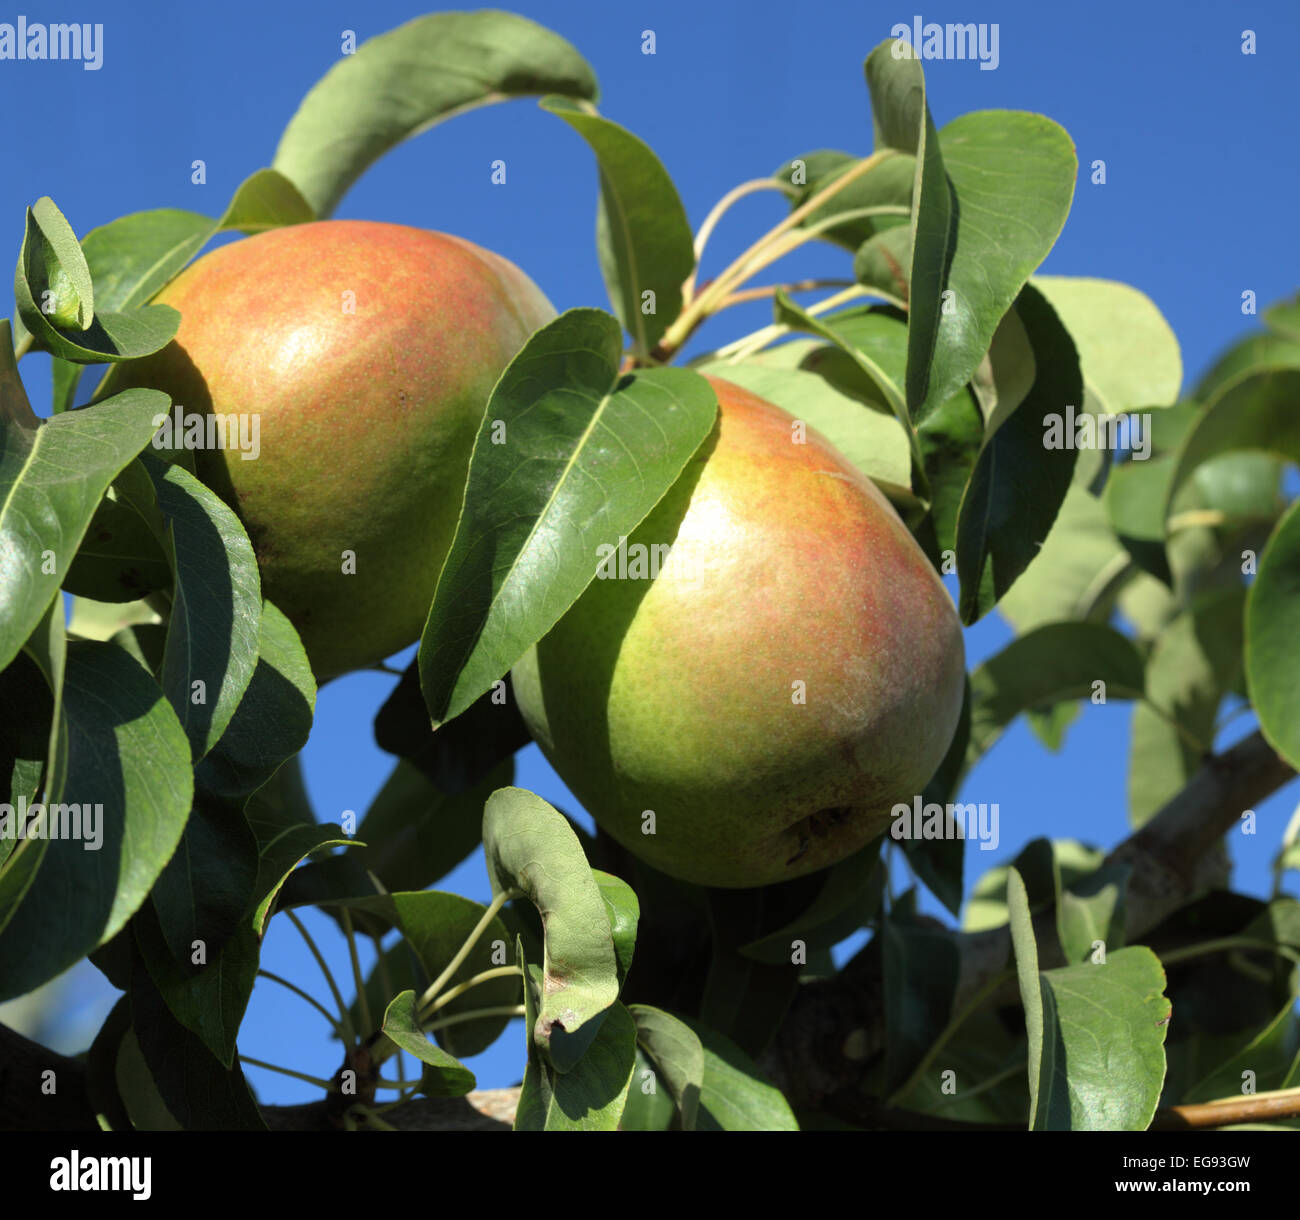 Bartlett pears on the tree in a Washington orchard Stock Photo